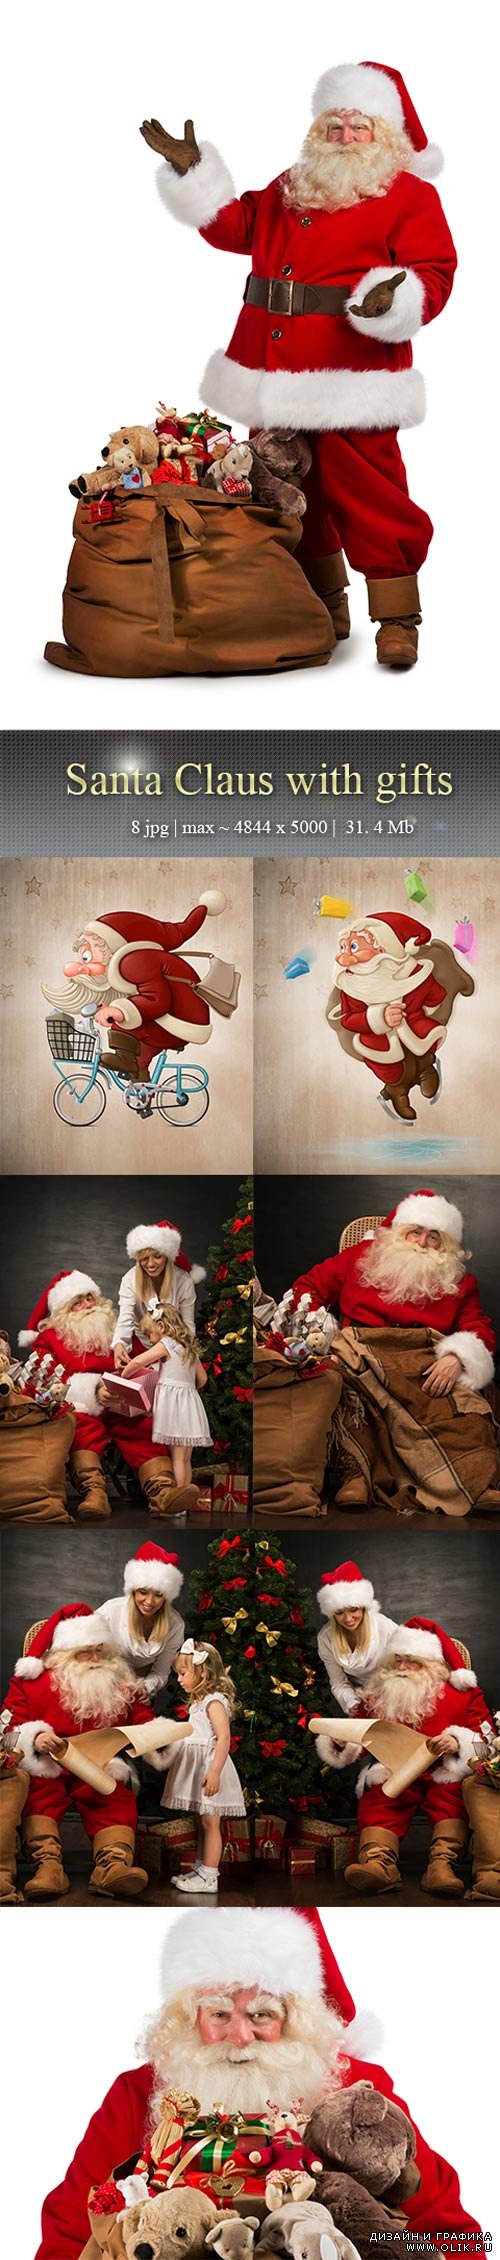 Santa Claus  with  gifts